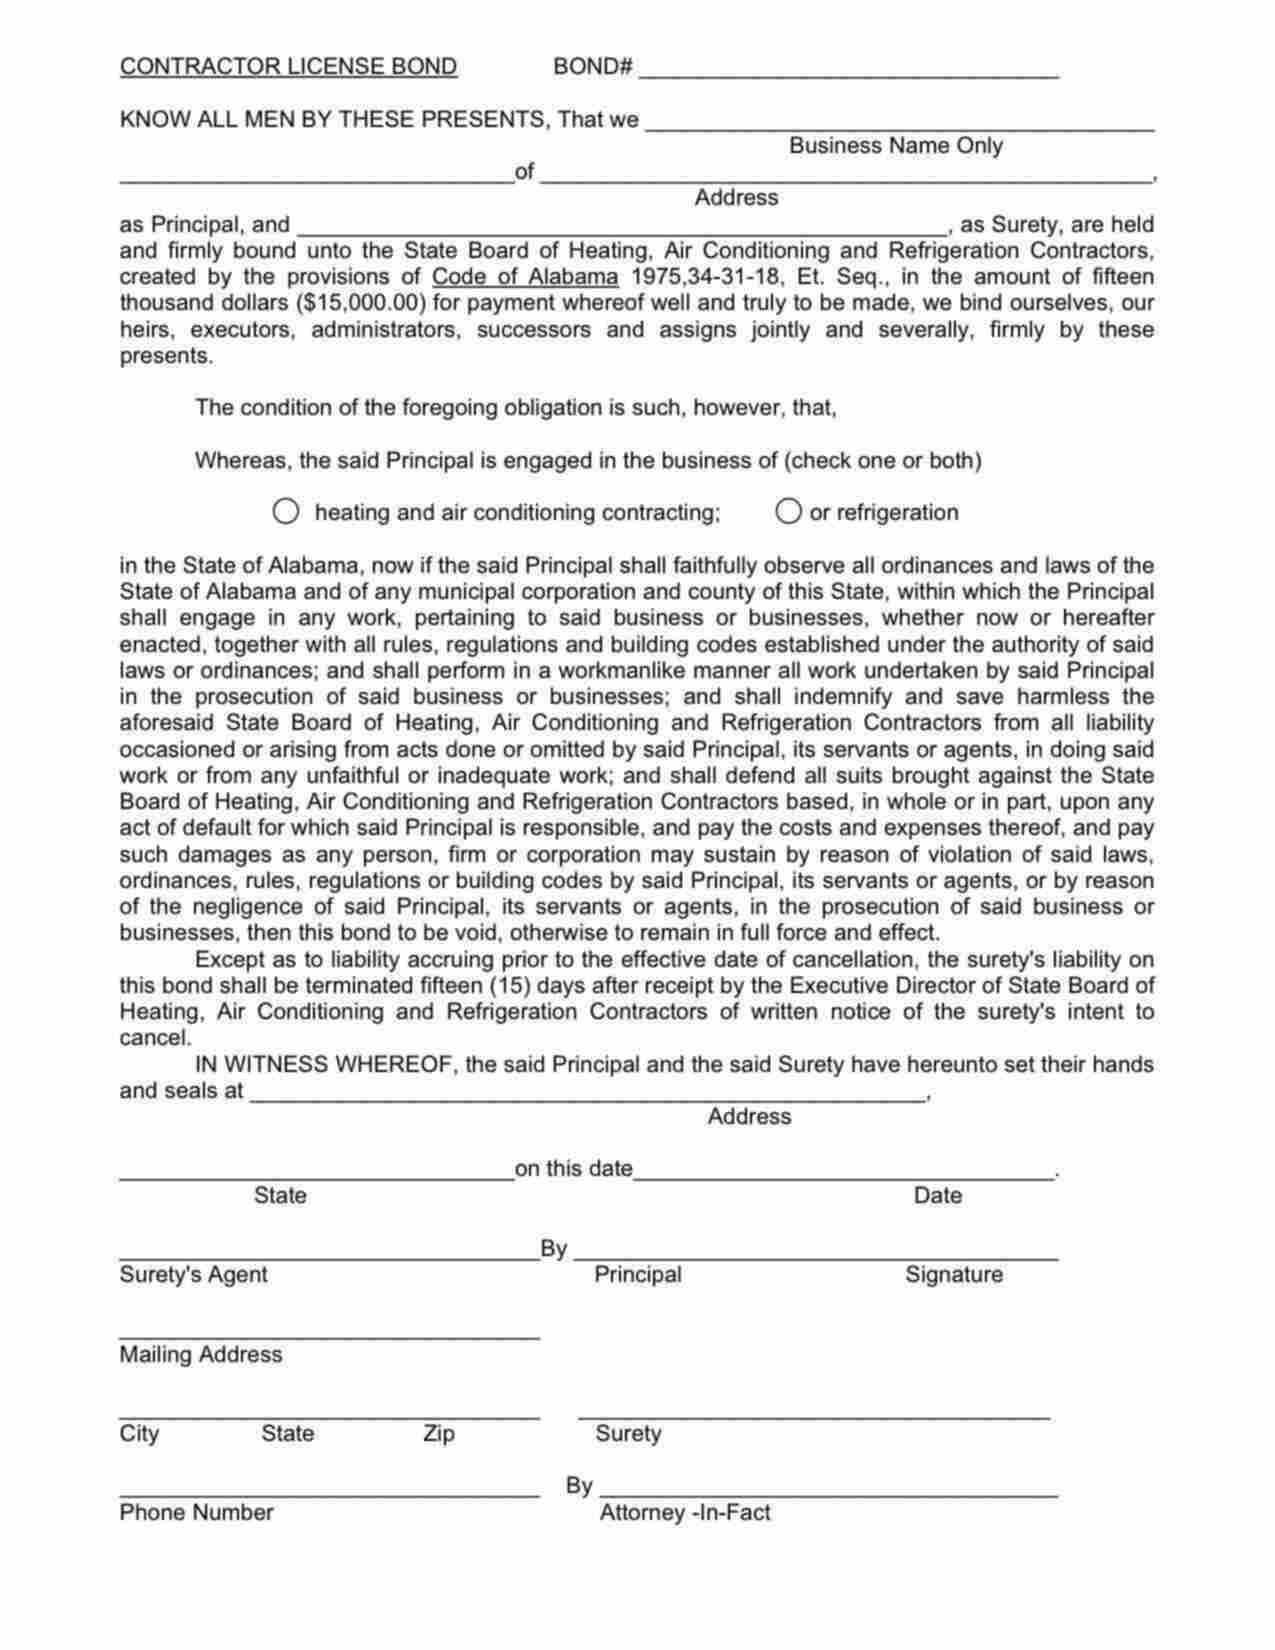 Alabama Heating and Air Conditioning AND Refrigeration Contractor Bond Form